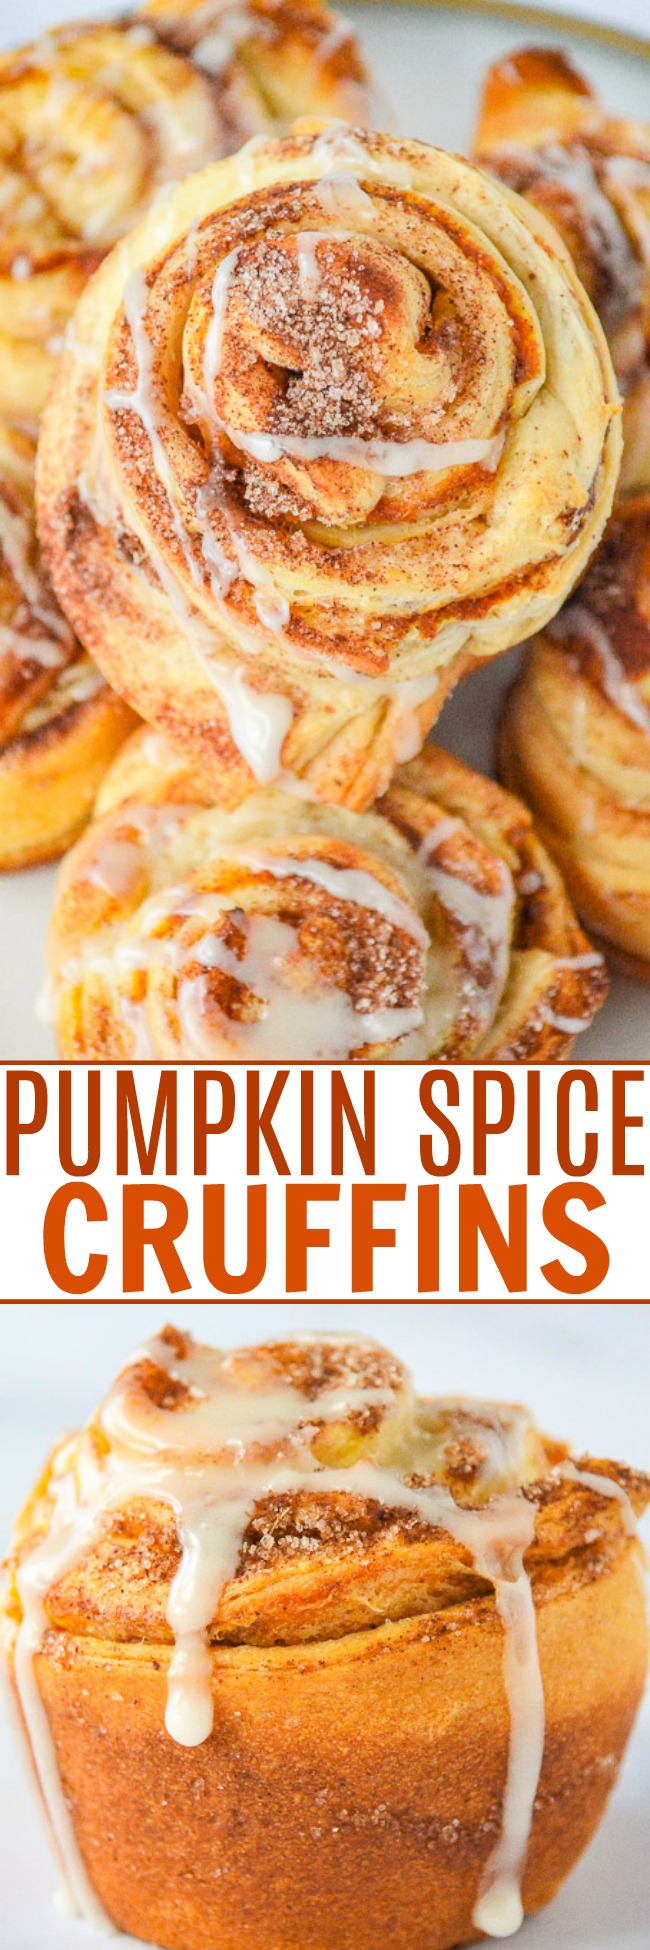 Pumpkin Spice Cruffins - What you get when you marry a croissant with pumpkin spice and bake it in a muffin pan!! The EASIEST recipe that uses just a handful of convenience ingredients, ready in 20 minutes, and perfect for pumpkin season!!